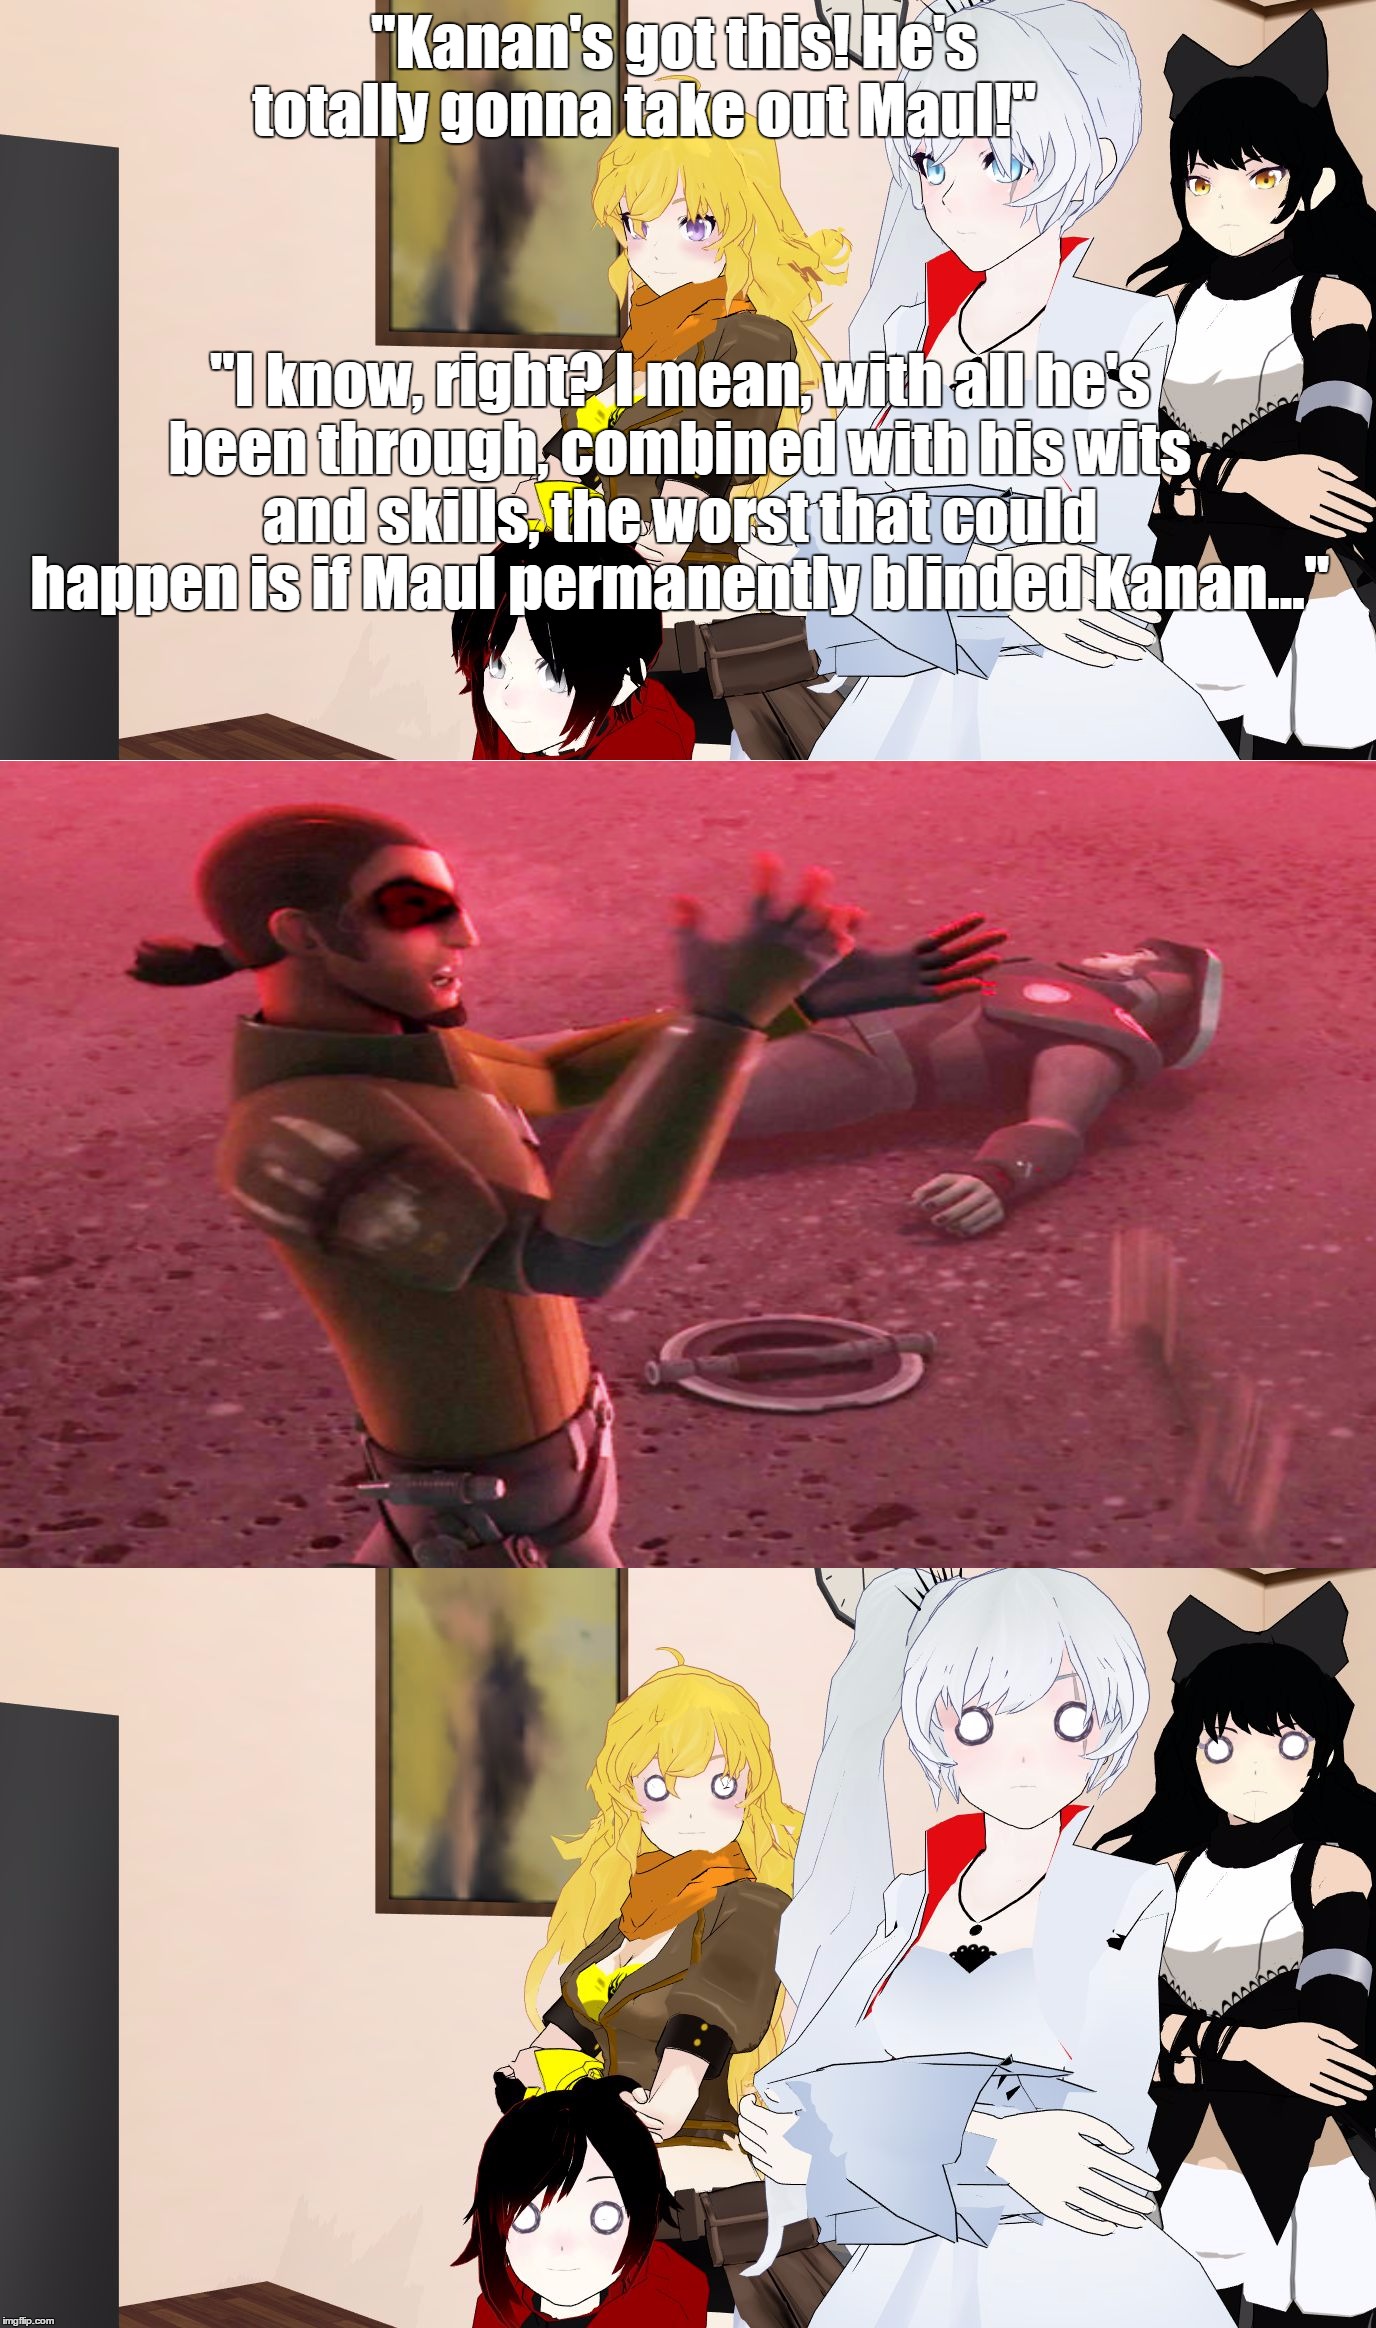 RWBY Reaction | "Kanan's got this! He's totally gonna take out Maul!"                                                                                                                  "I know, right? I mean, with all he's been through, combined with his wits and skills, the worst that could happen is if Maul permanently blinded Kanan..." | image tagged in rwby reaction | made w/ Imgflip meme maker